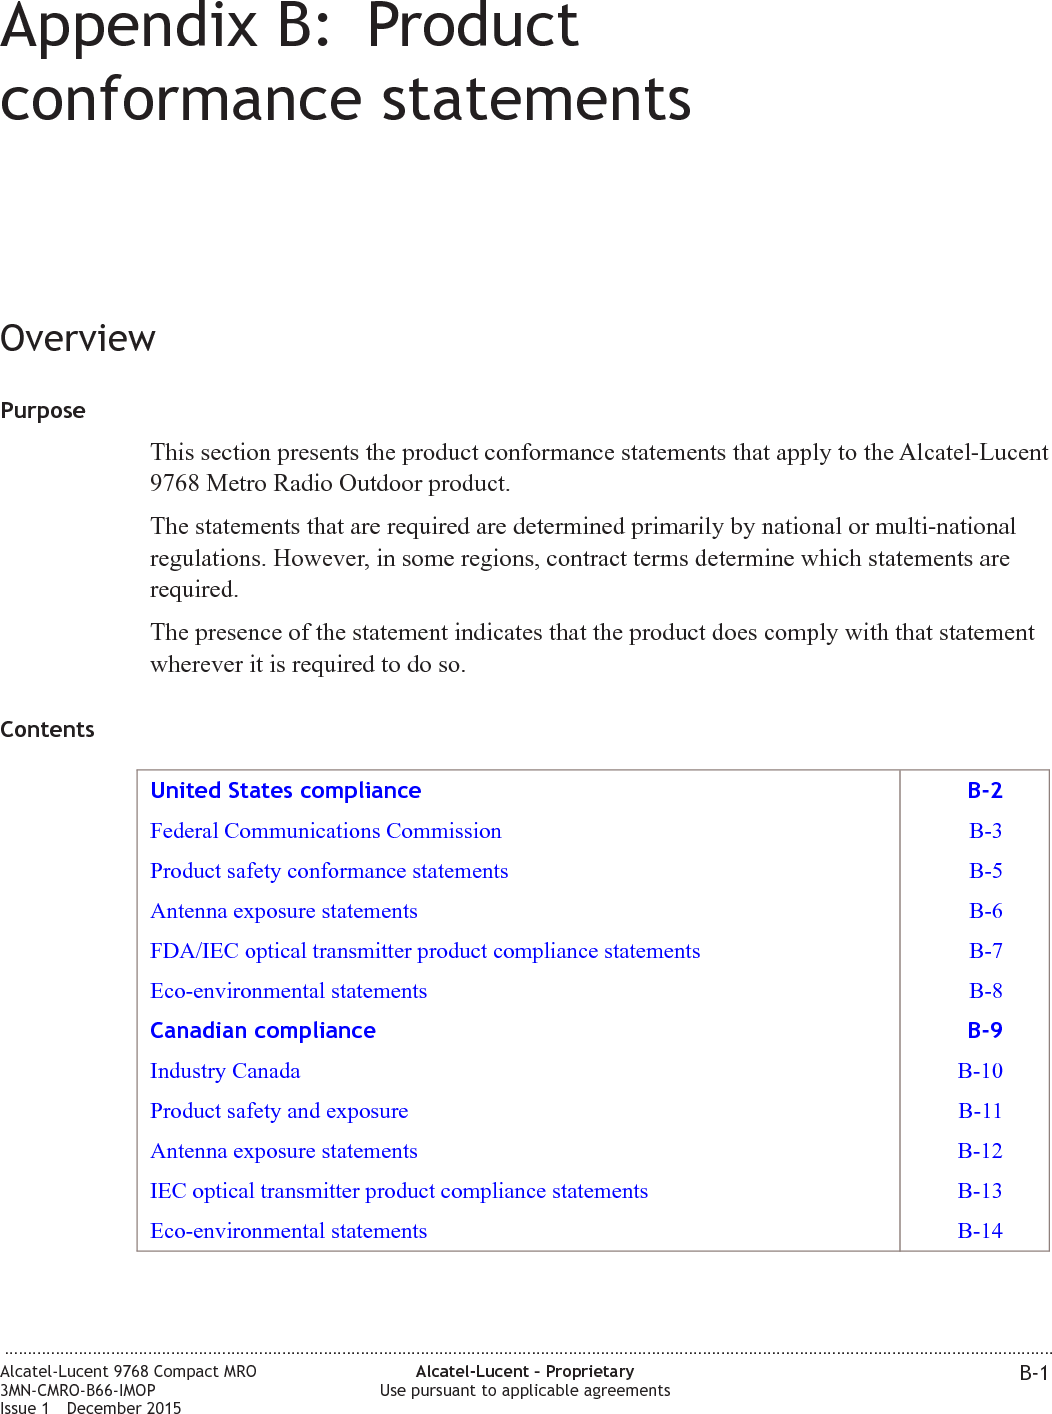 Appendix B: Productconformance statementsOverviewPurposeThis section presents the product conformance statements that apply to the Alcatel-Lucent9768 Metro Radio Outdoor product.The statements that are required are determined primarily by national or multi-nationalregulations. However, in some regions, contract terms determine which statements arerequired.The presence of the statement indicates that the product does comply with that statementwherever it is required to do so.ContentsUnited States compliance B-2Federal Communications Commission B-3Product safety conformance statements B-5Antenna exposure statements B-6FDA/IEC optical transmitter product compliance statements B-7Eco-environmental statements B-8Canadian compliance B-9Industry Canada B-10Product safety and exposure B-11Antenna exposure statements B-12IEC optical transmitter product compliance statements B-13Eco-environmental statements B-14...................................................................................................................................................................................................................................Alcatel-Lucent 9768 Compact MRO3MN-CMRO-B66-IMOPIssue 1 December 2015Alcatel-Lucent – ProprietaryUse pursuant to applicable agreements B-1FCC FILING FCC FILING